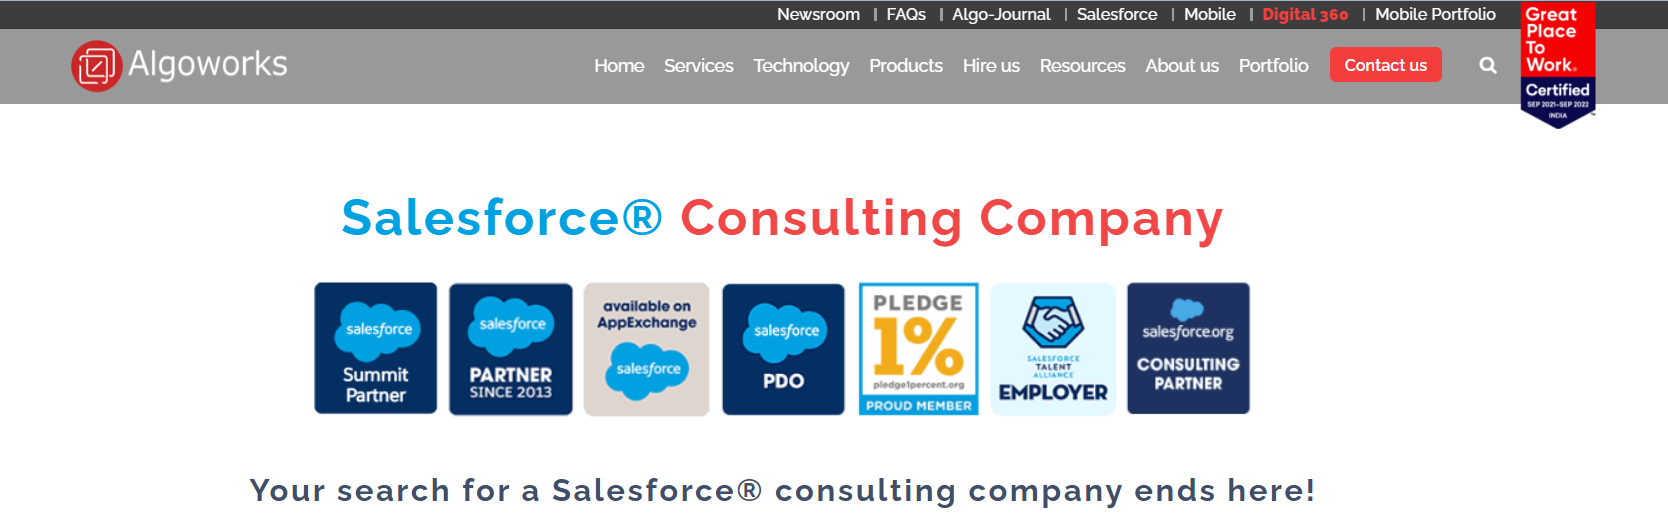 Salesforce Consulting Company in USA - Best Consulting Services